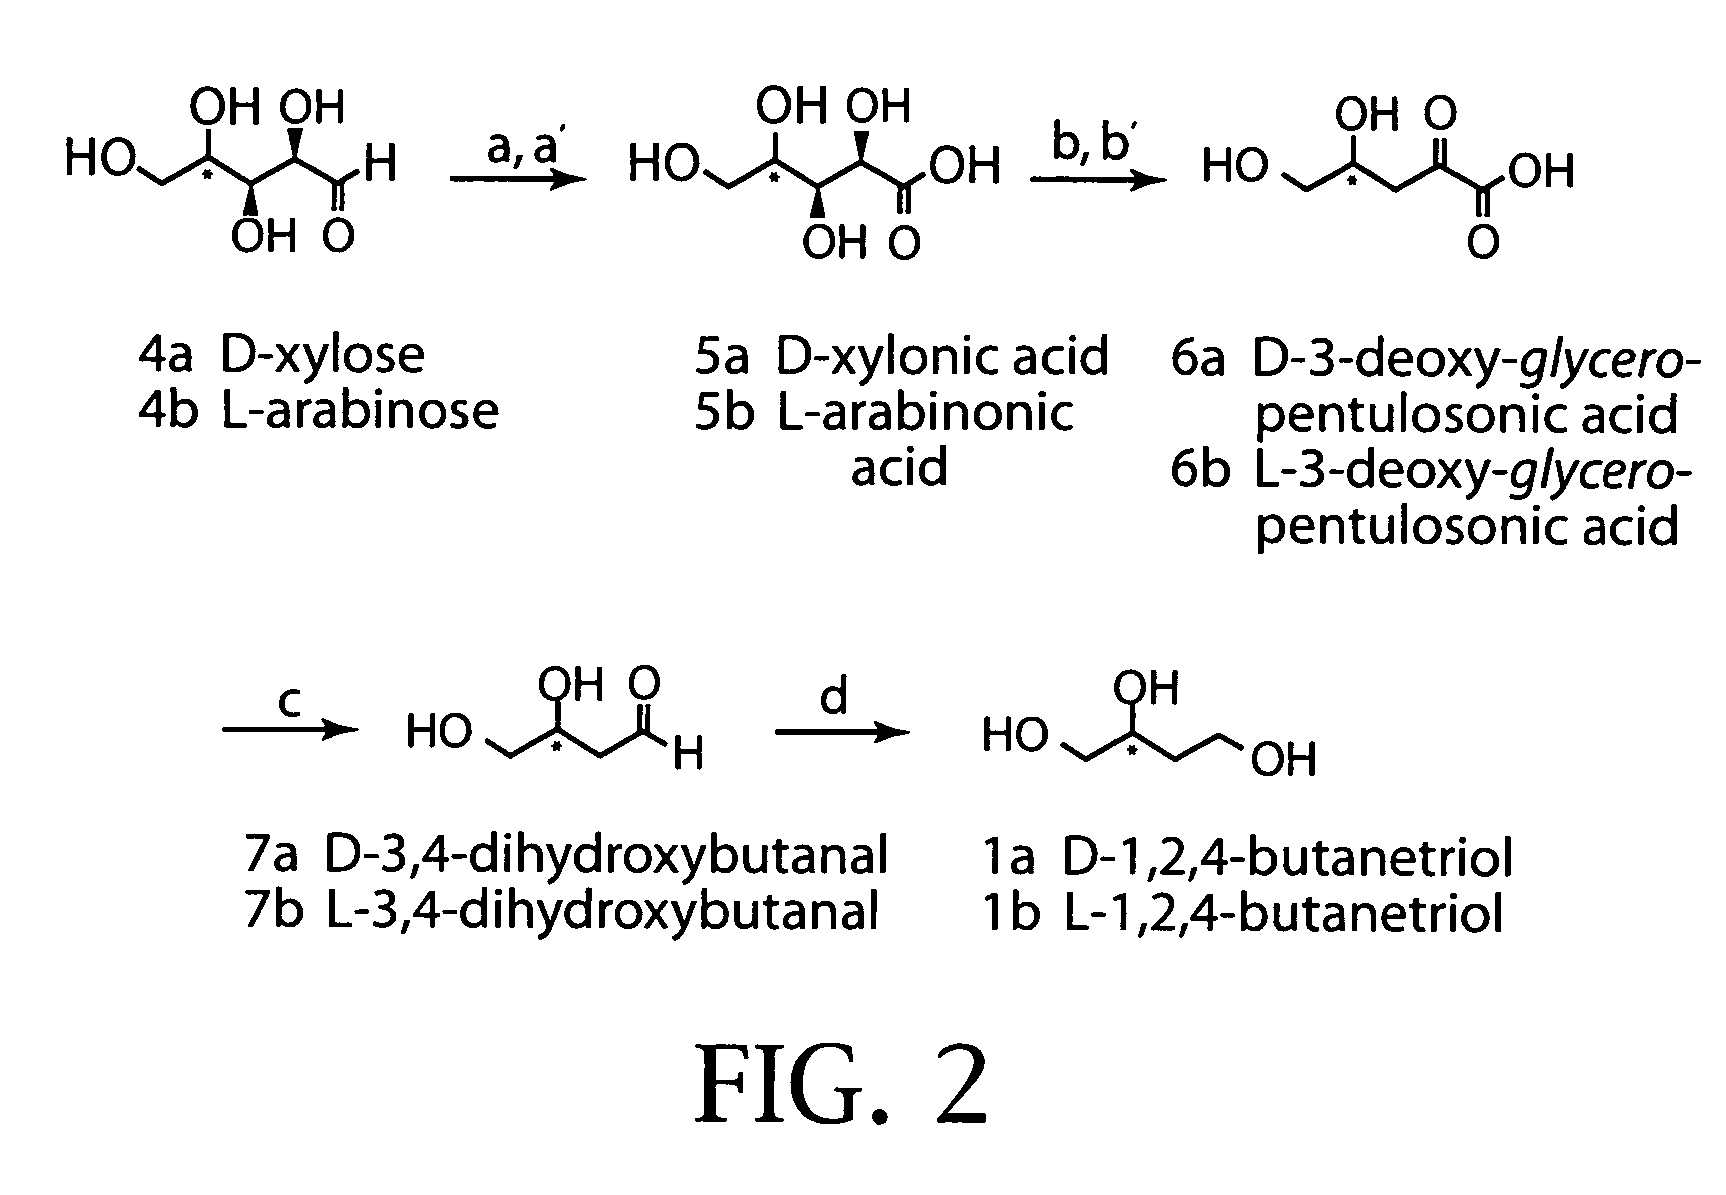 Synthesis of 1,2,4-butanetriol enantiomers from carbohydrates